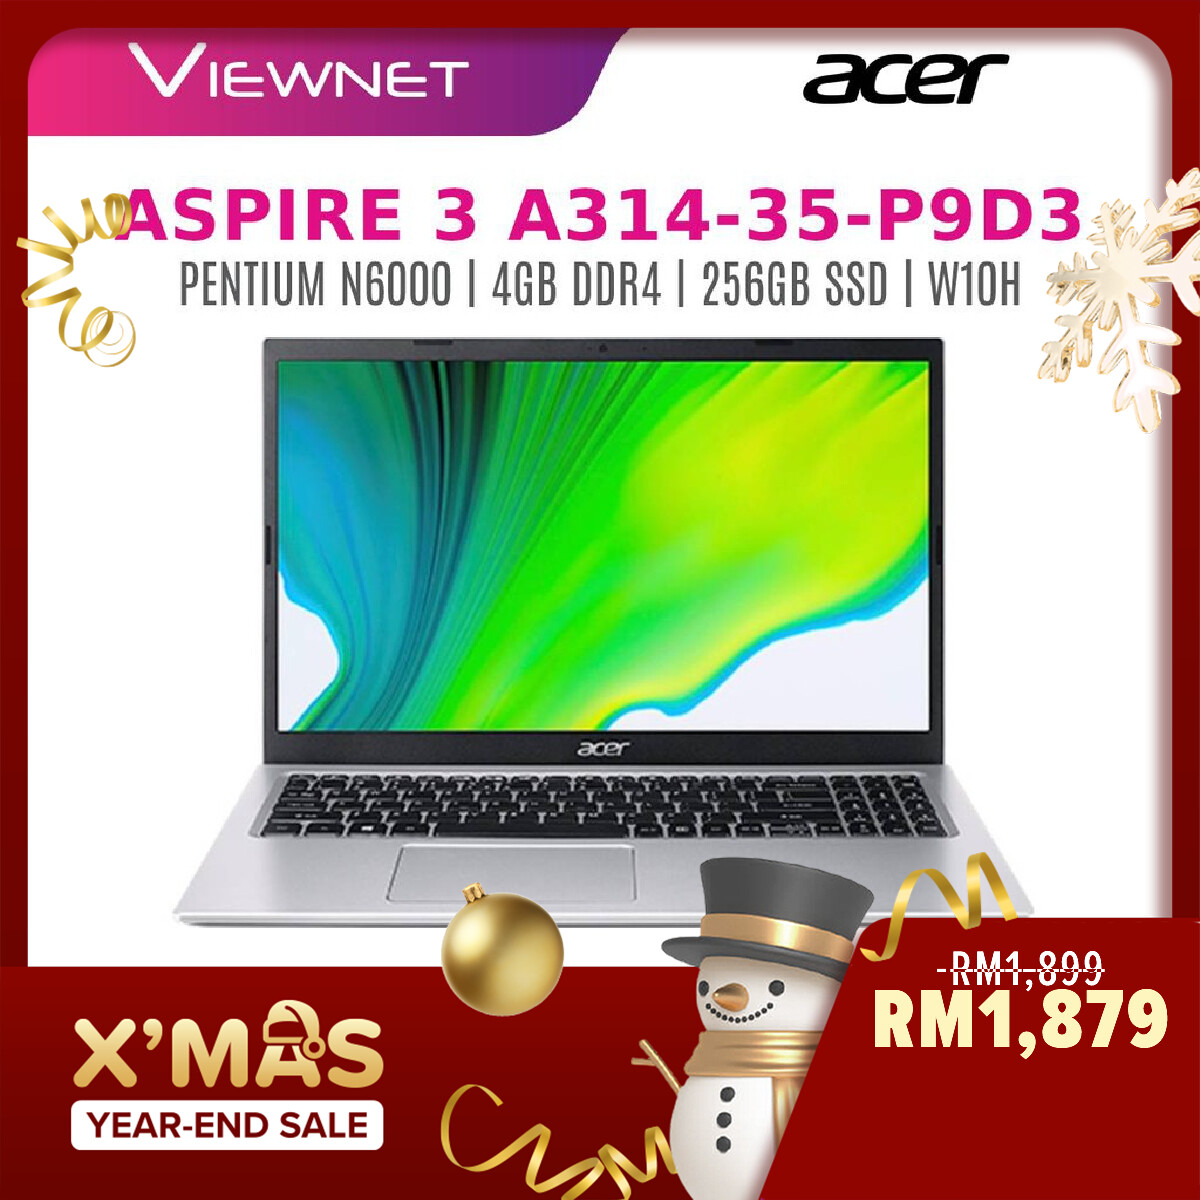 ACER ASPIRE 3 A315-35-P5JS/A315-35-P5F8/A314-35-P9D3 LAPTOP INTEL PENTIUM / 4GB RAM / 256GB PCIE NVME SSD/ 15.6-INCH/14-INCH FHD / WIN 10 FREE BACKPACK